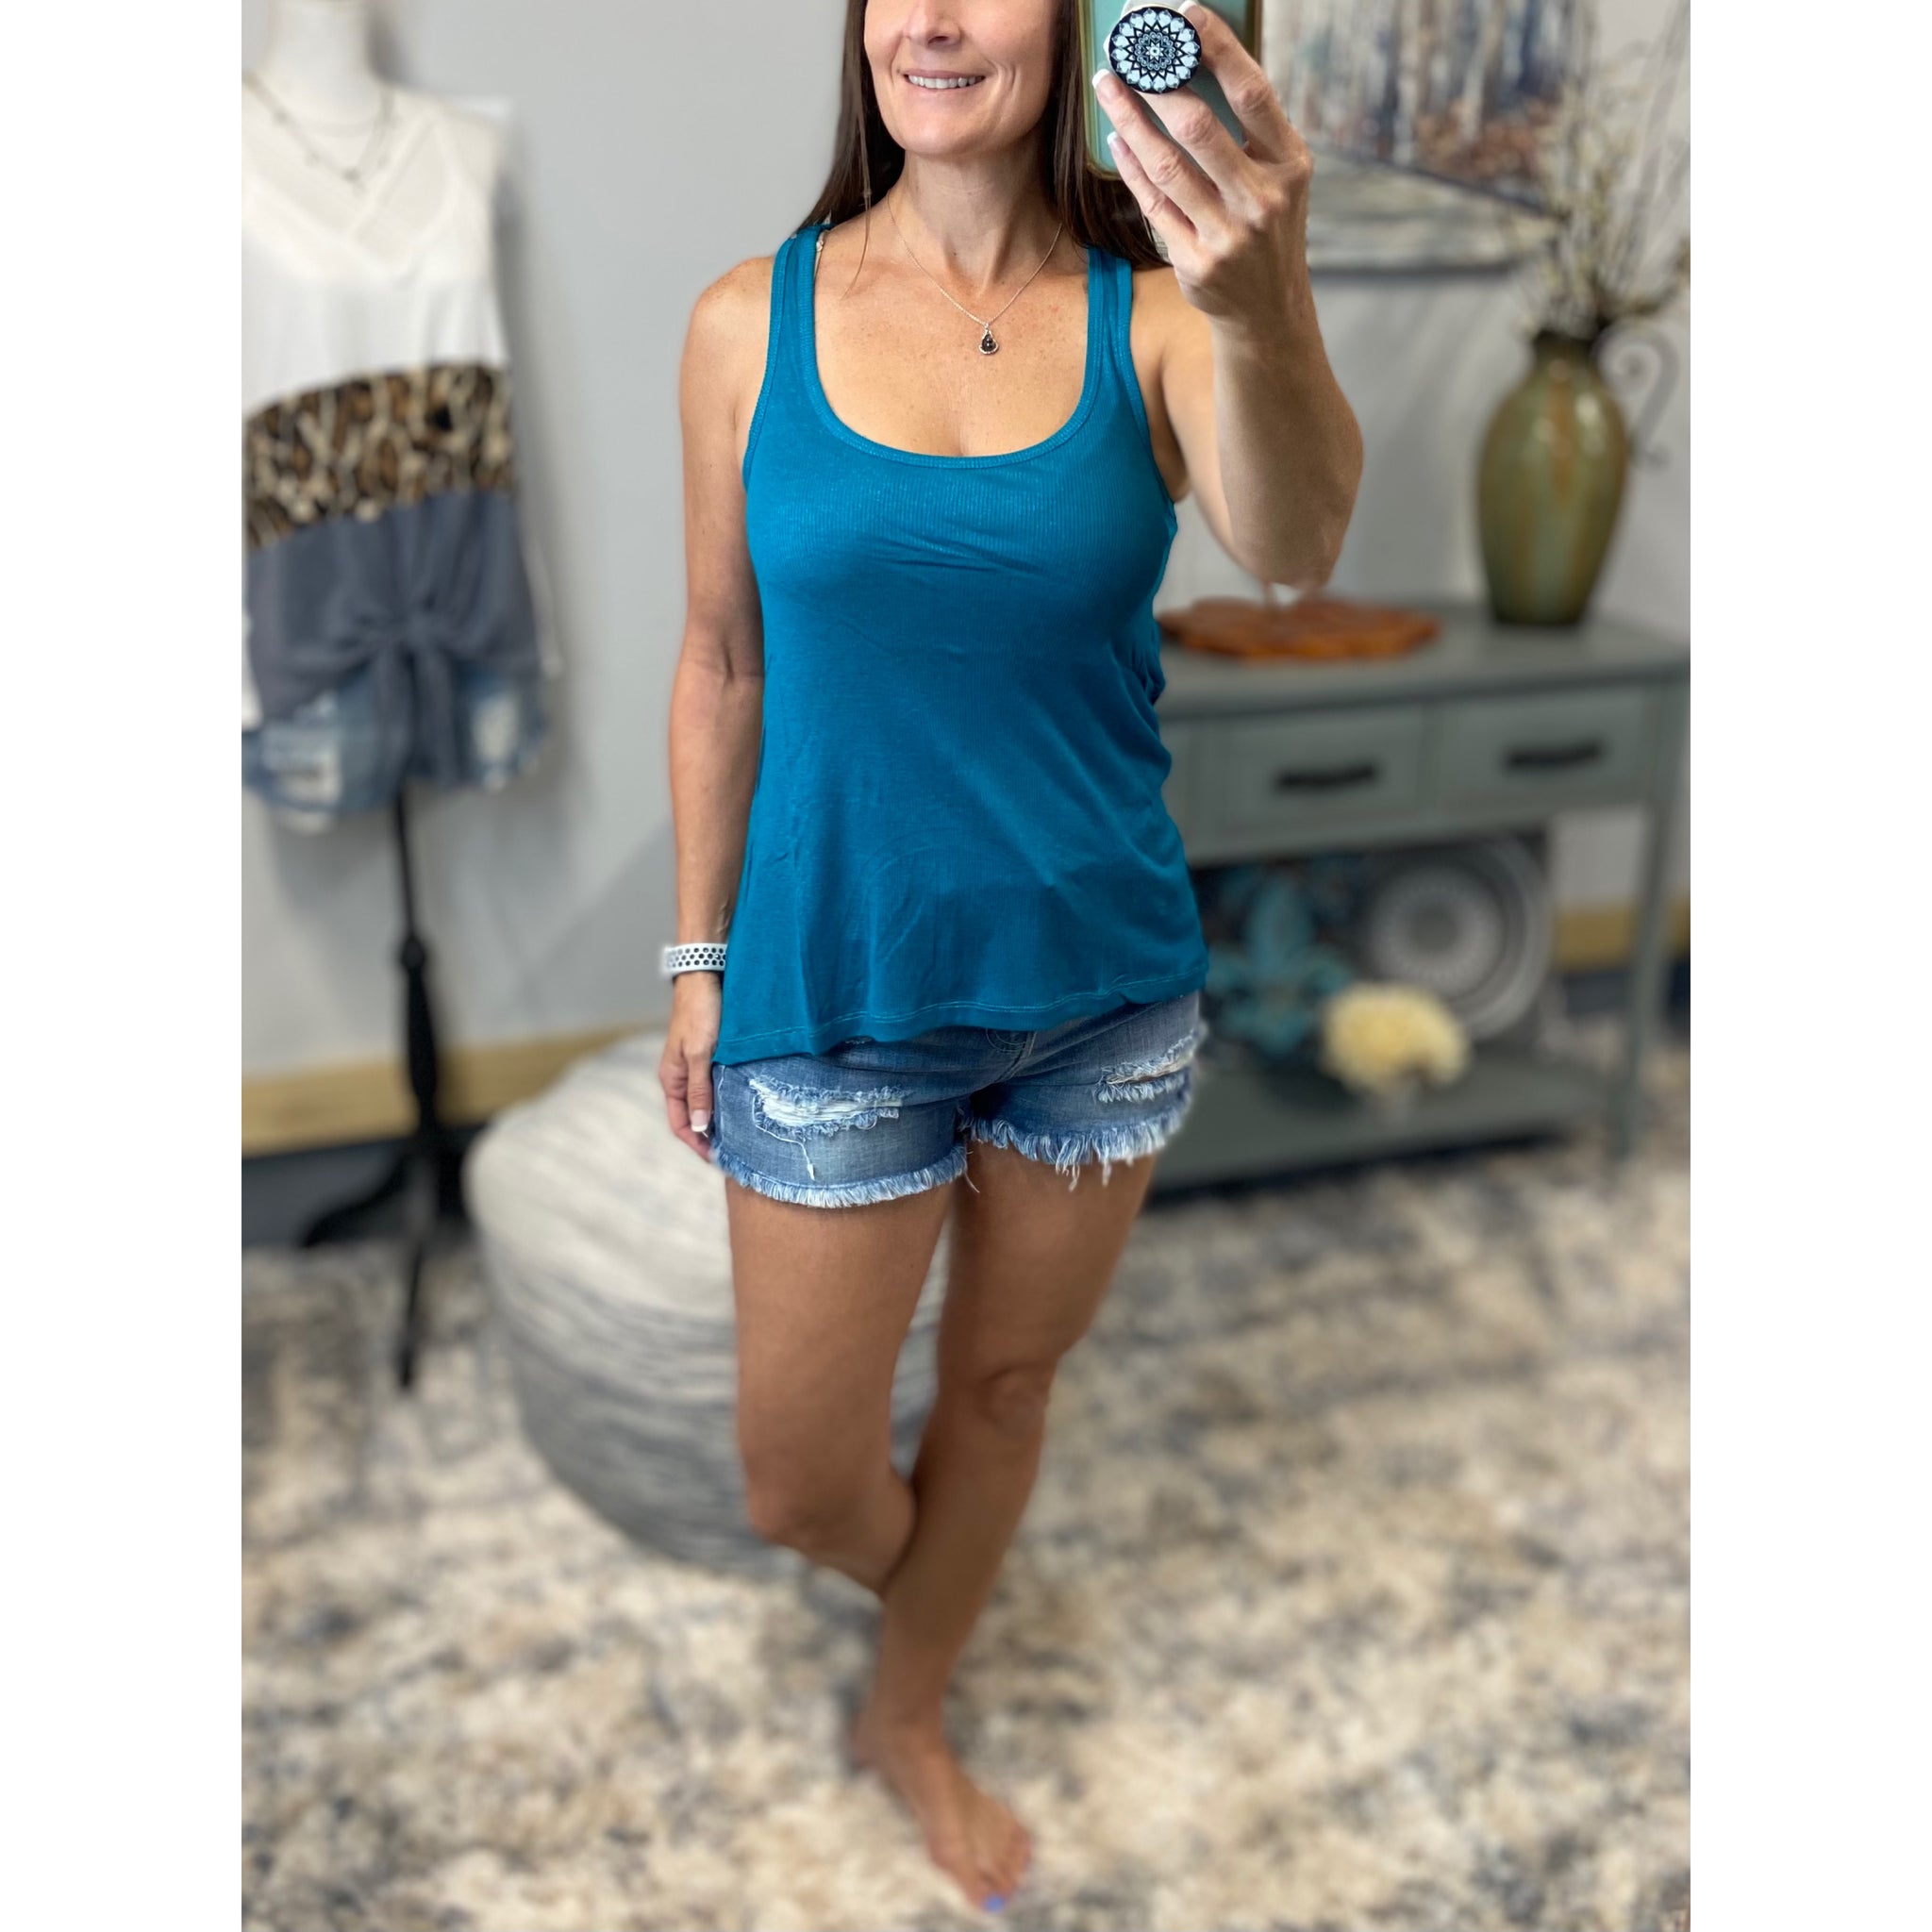 Sparkle Low Cut Summer Racerback Ribbed Floaty Tank Top Tunic Teal S/M/L